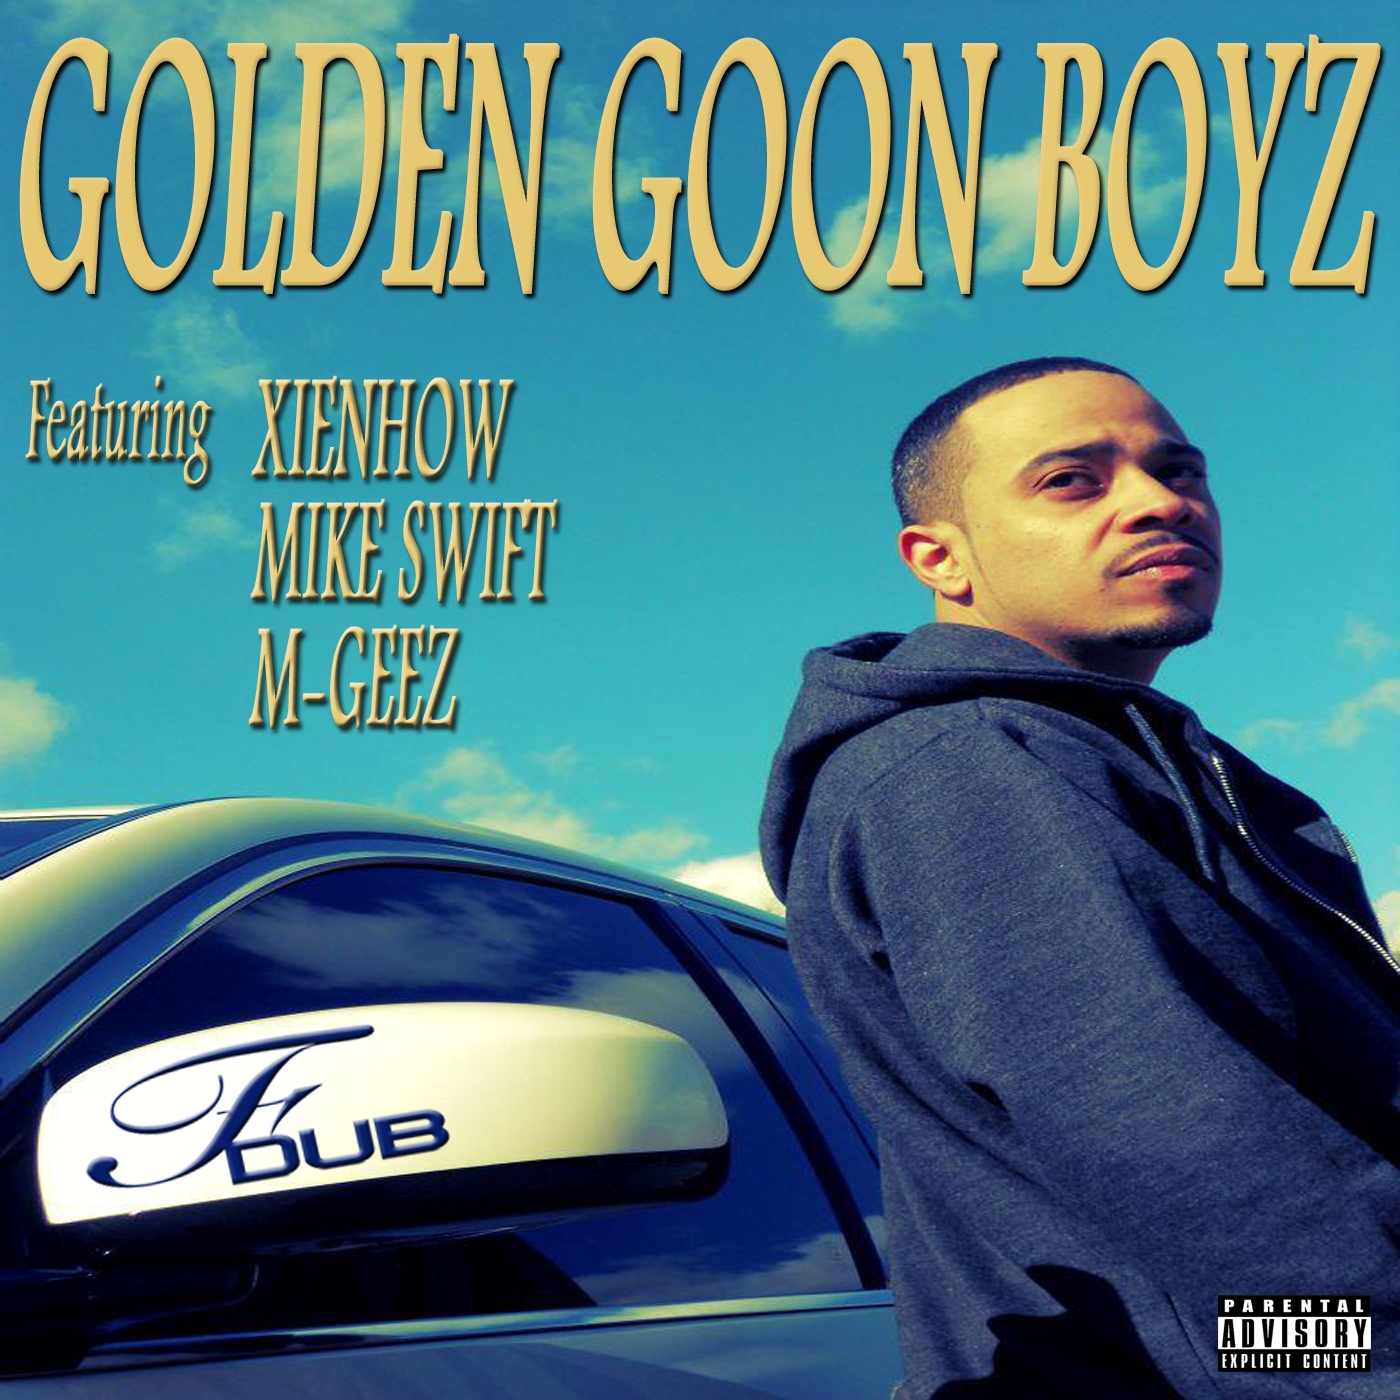 You are currently viewing Golden Goon Boyz Video Coming September